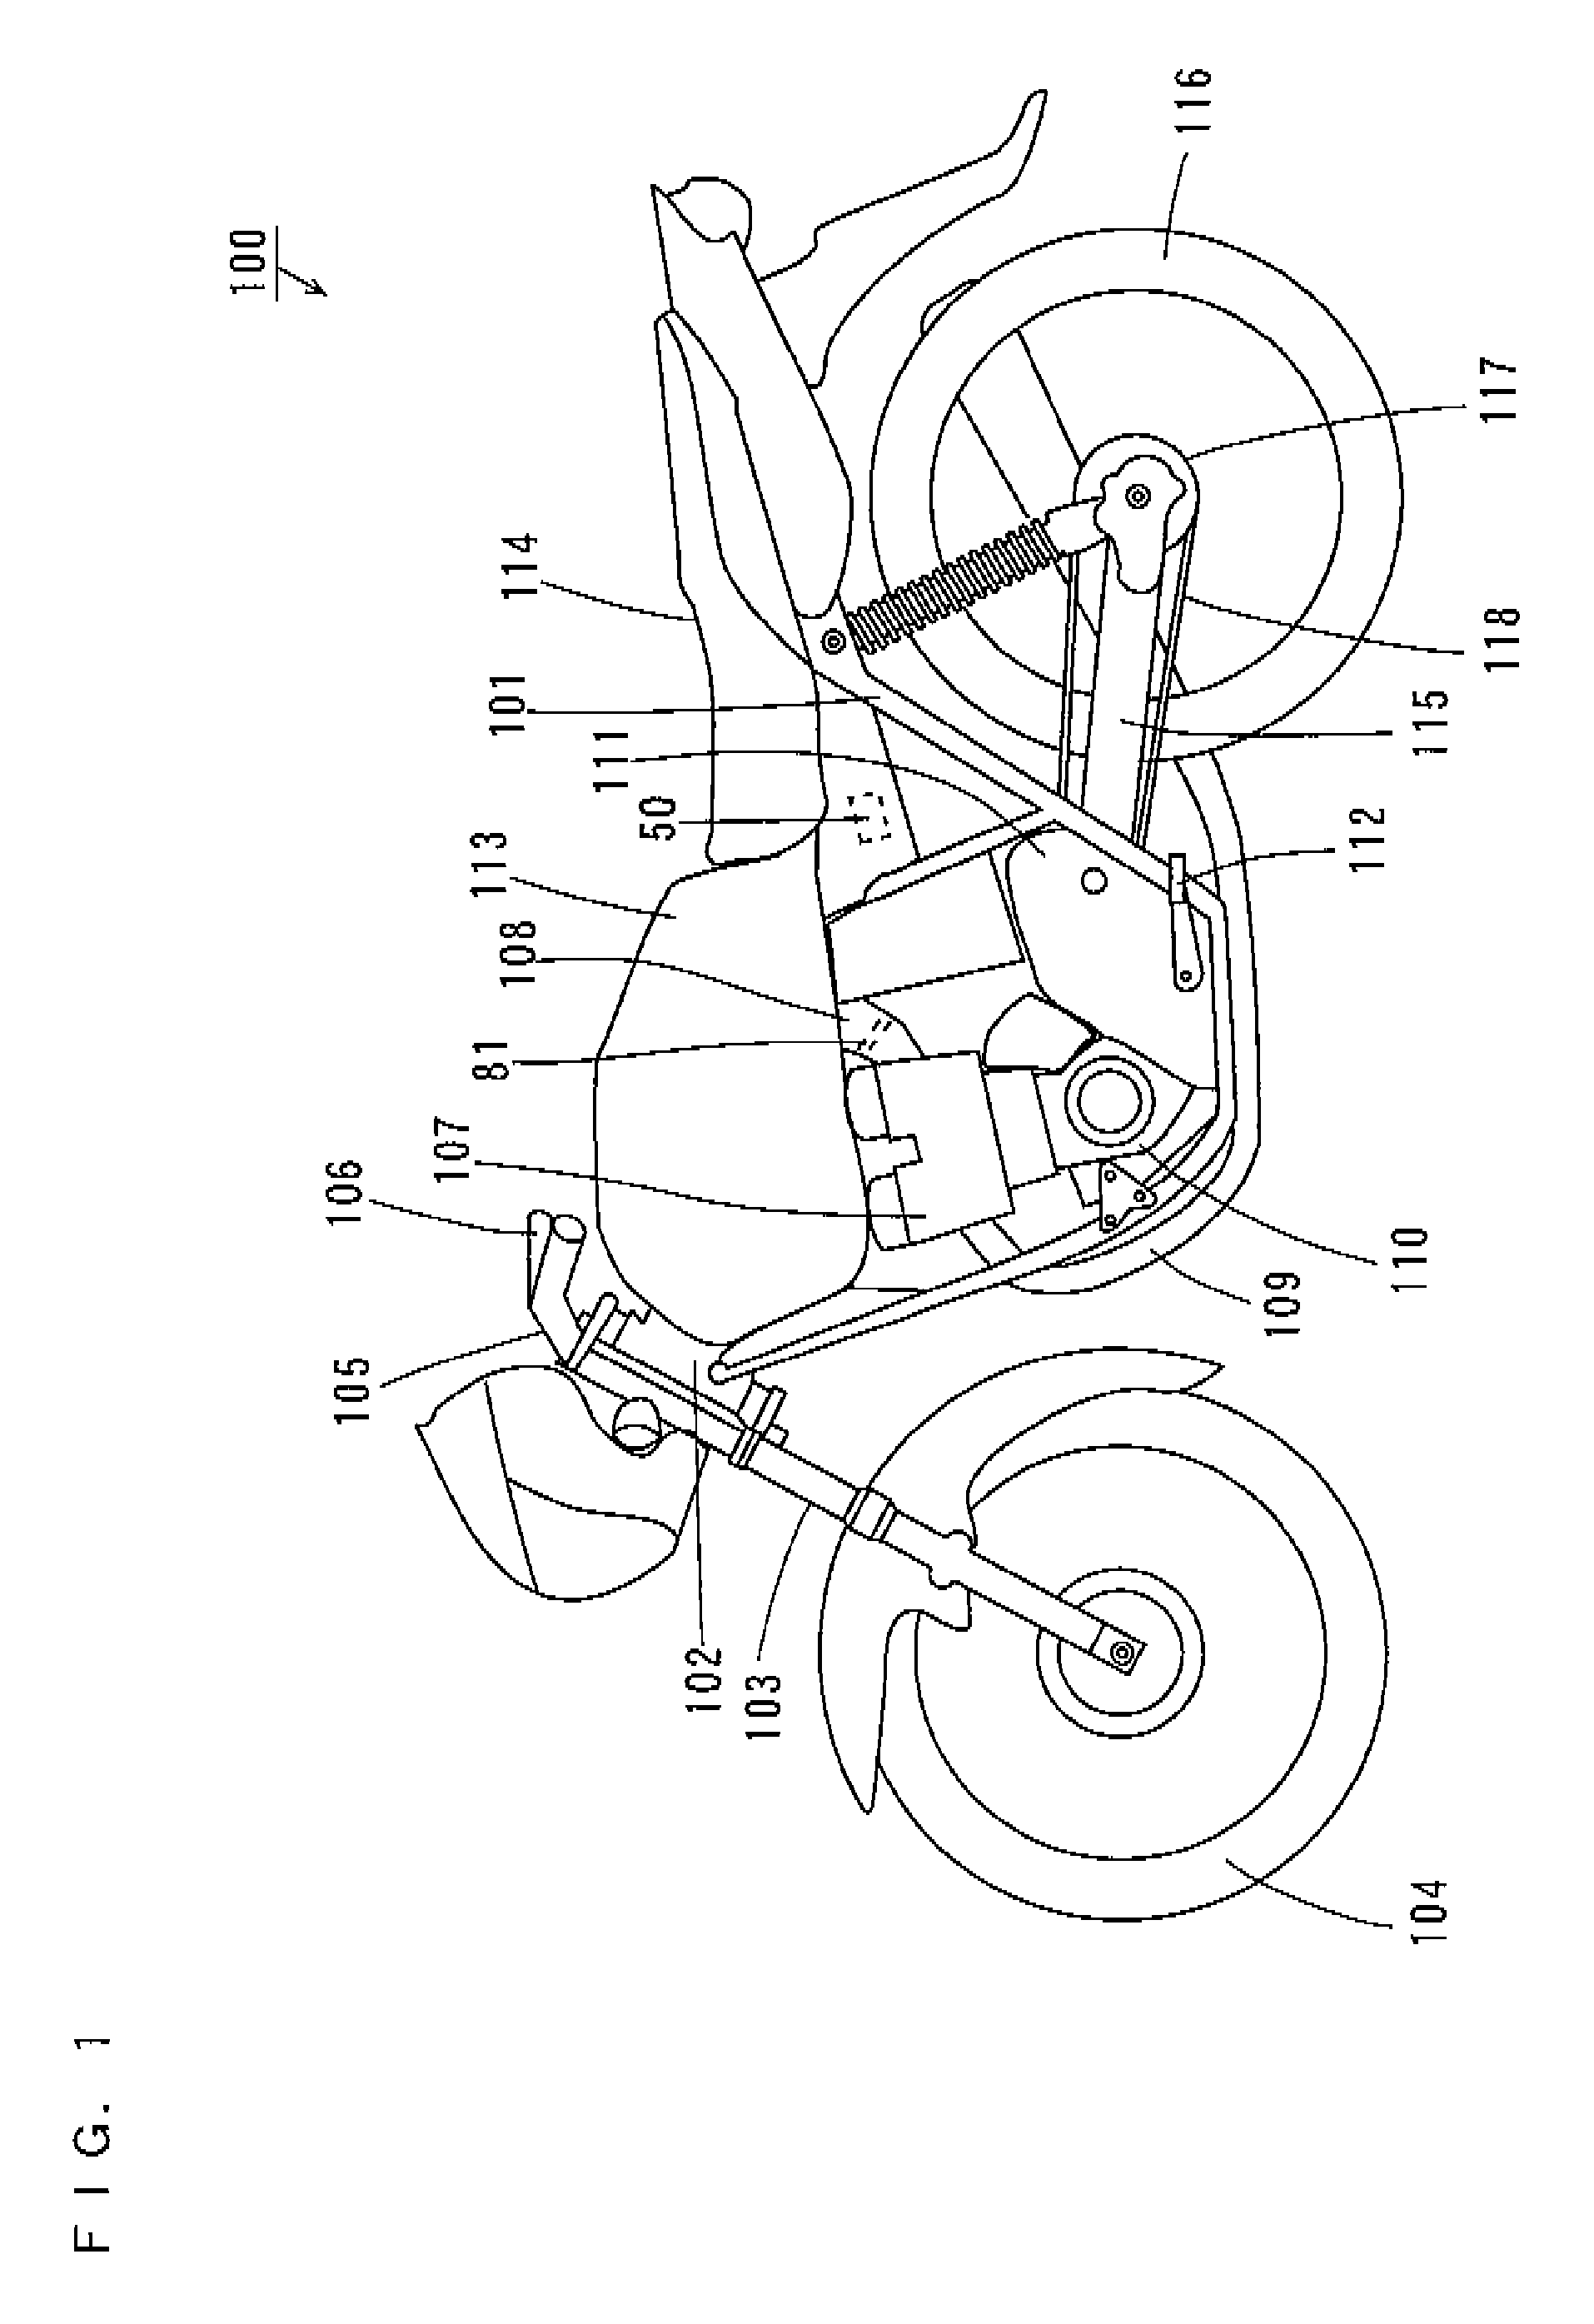 Control system and vehicle